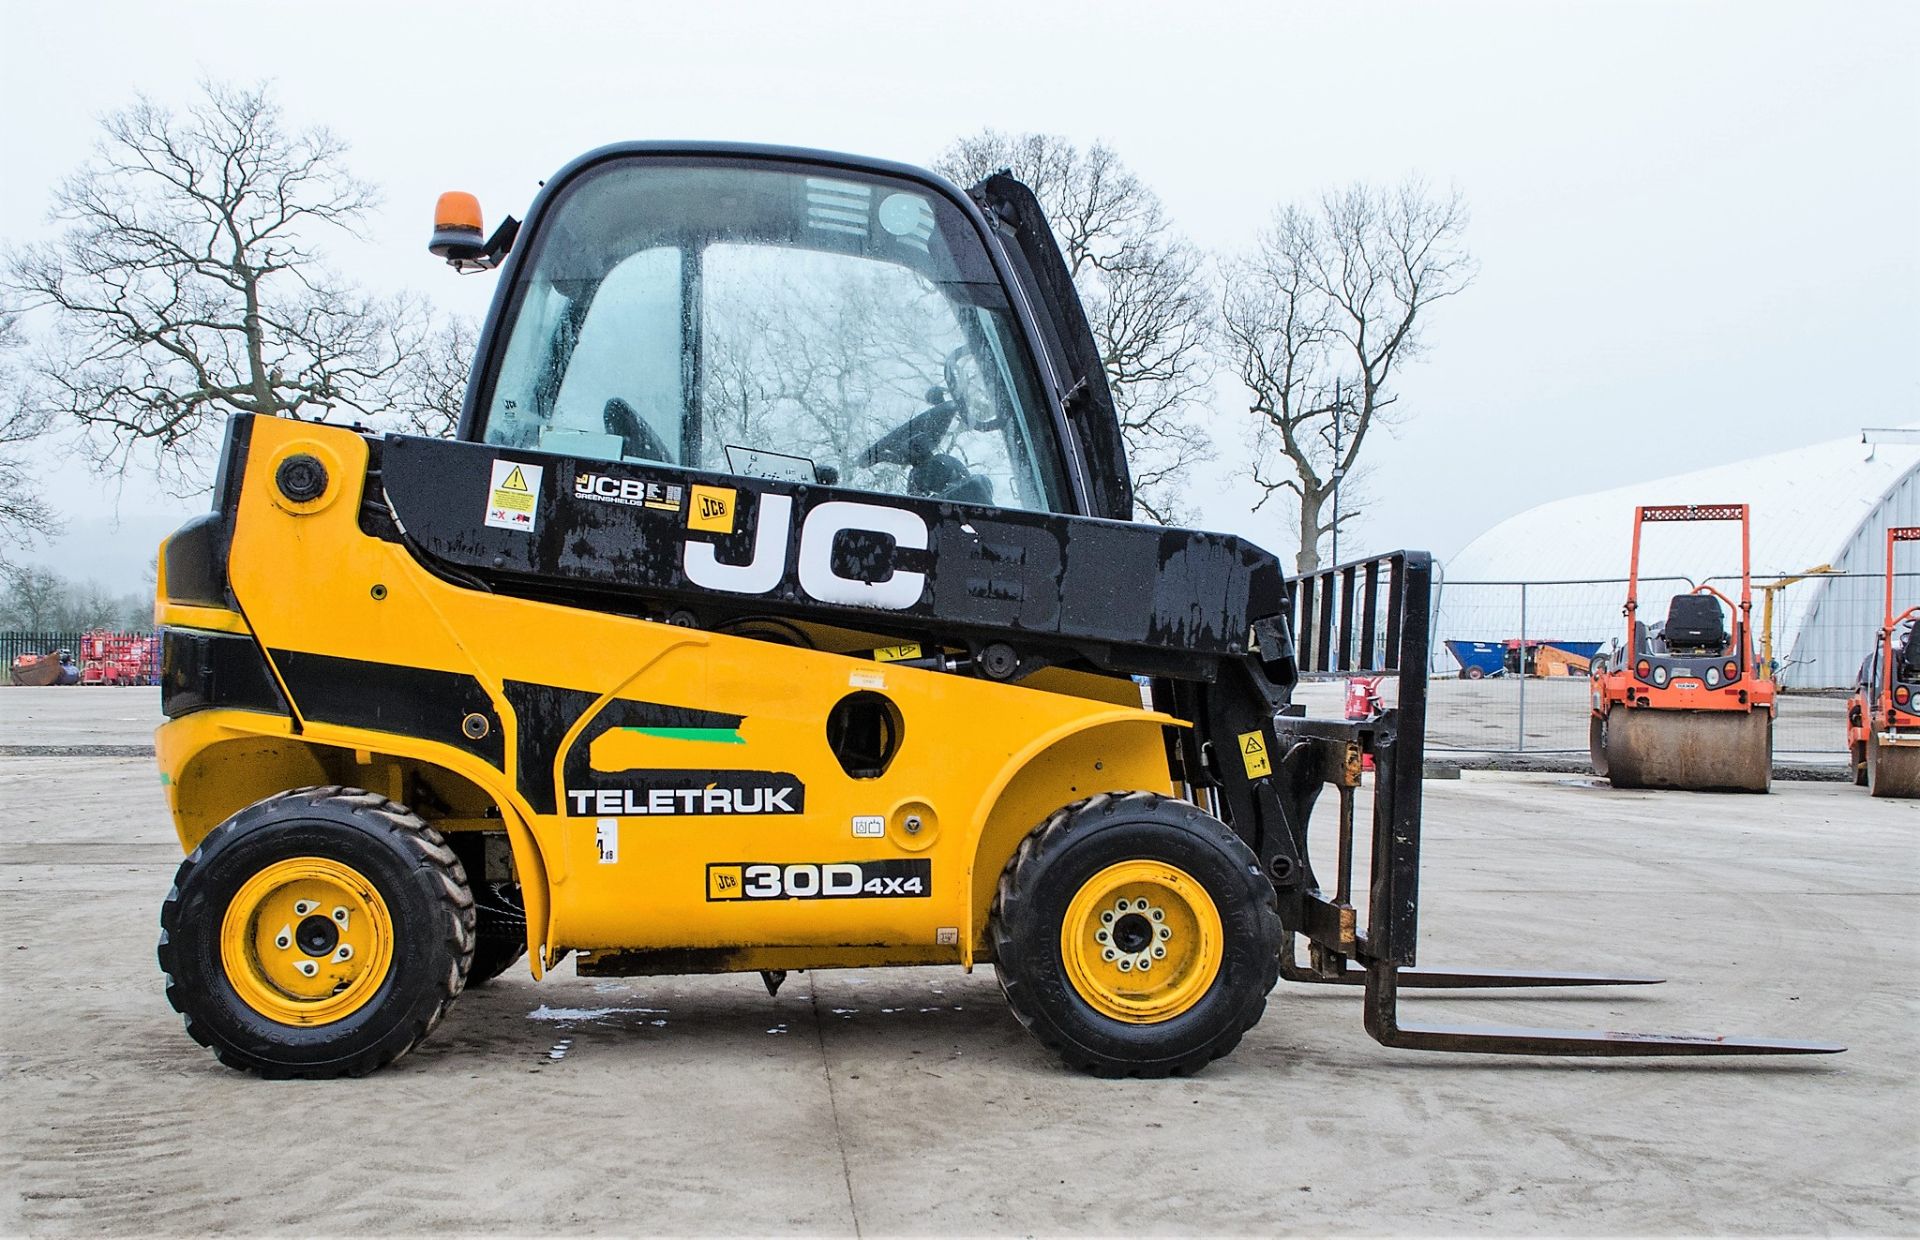 JCB Teletruk 30D 4x4 telescopic fork lift truck Year: 2013 S/N: 1541935 Recorded Hours: 1127 A623434 - Image 8 of 24